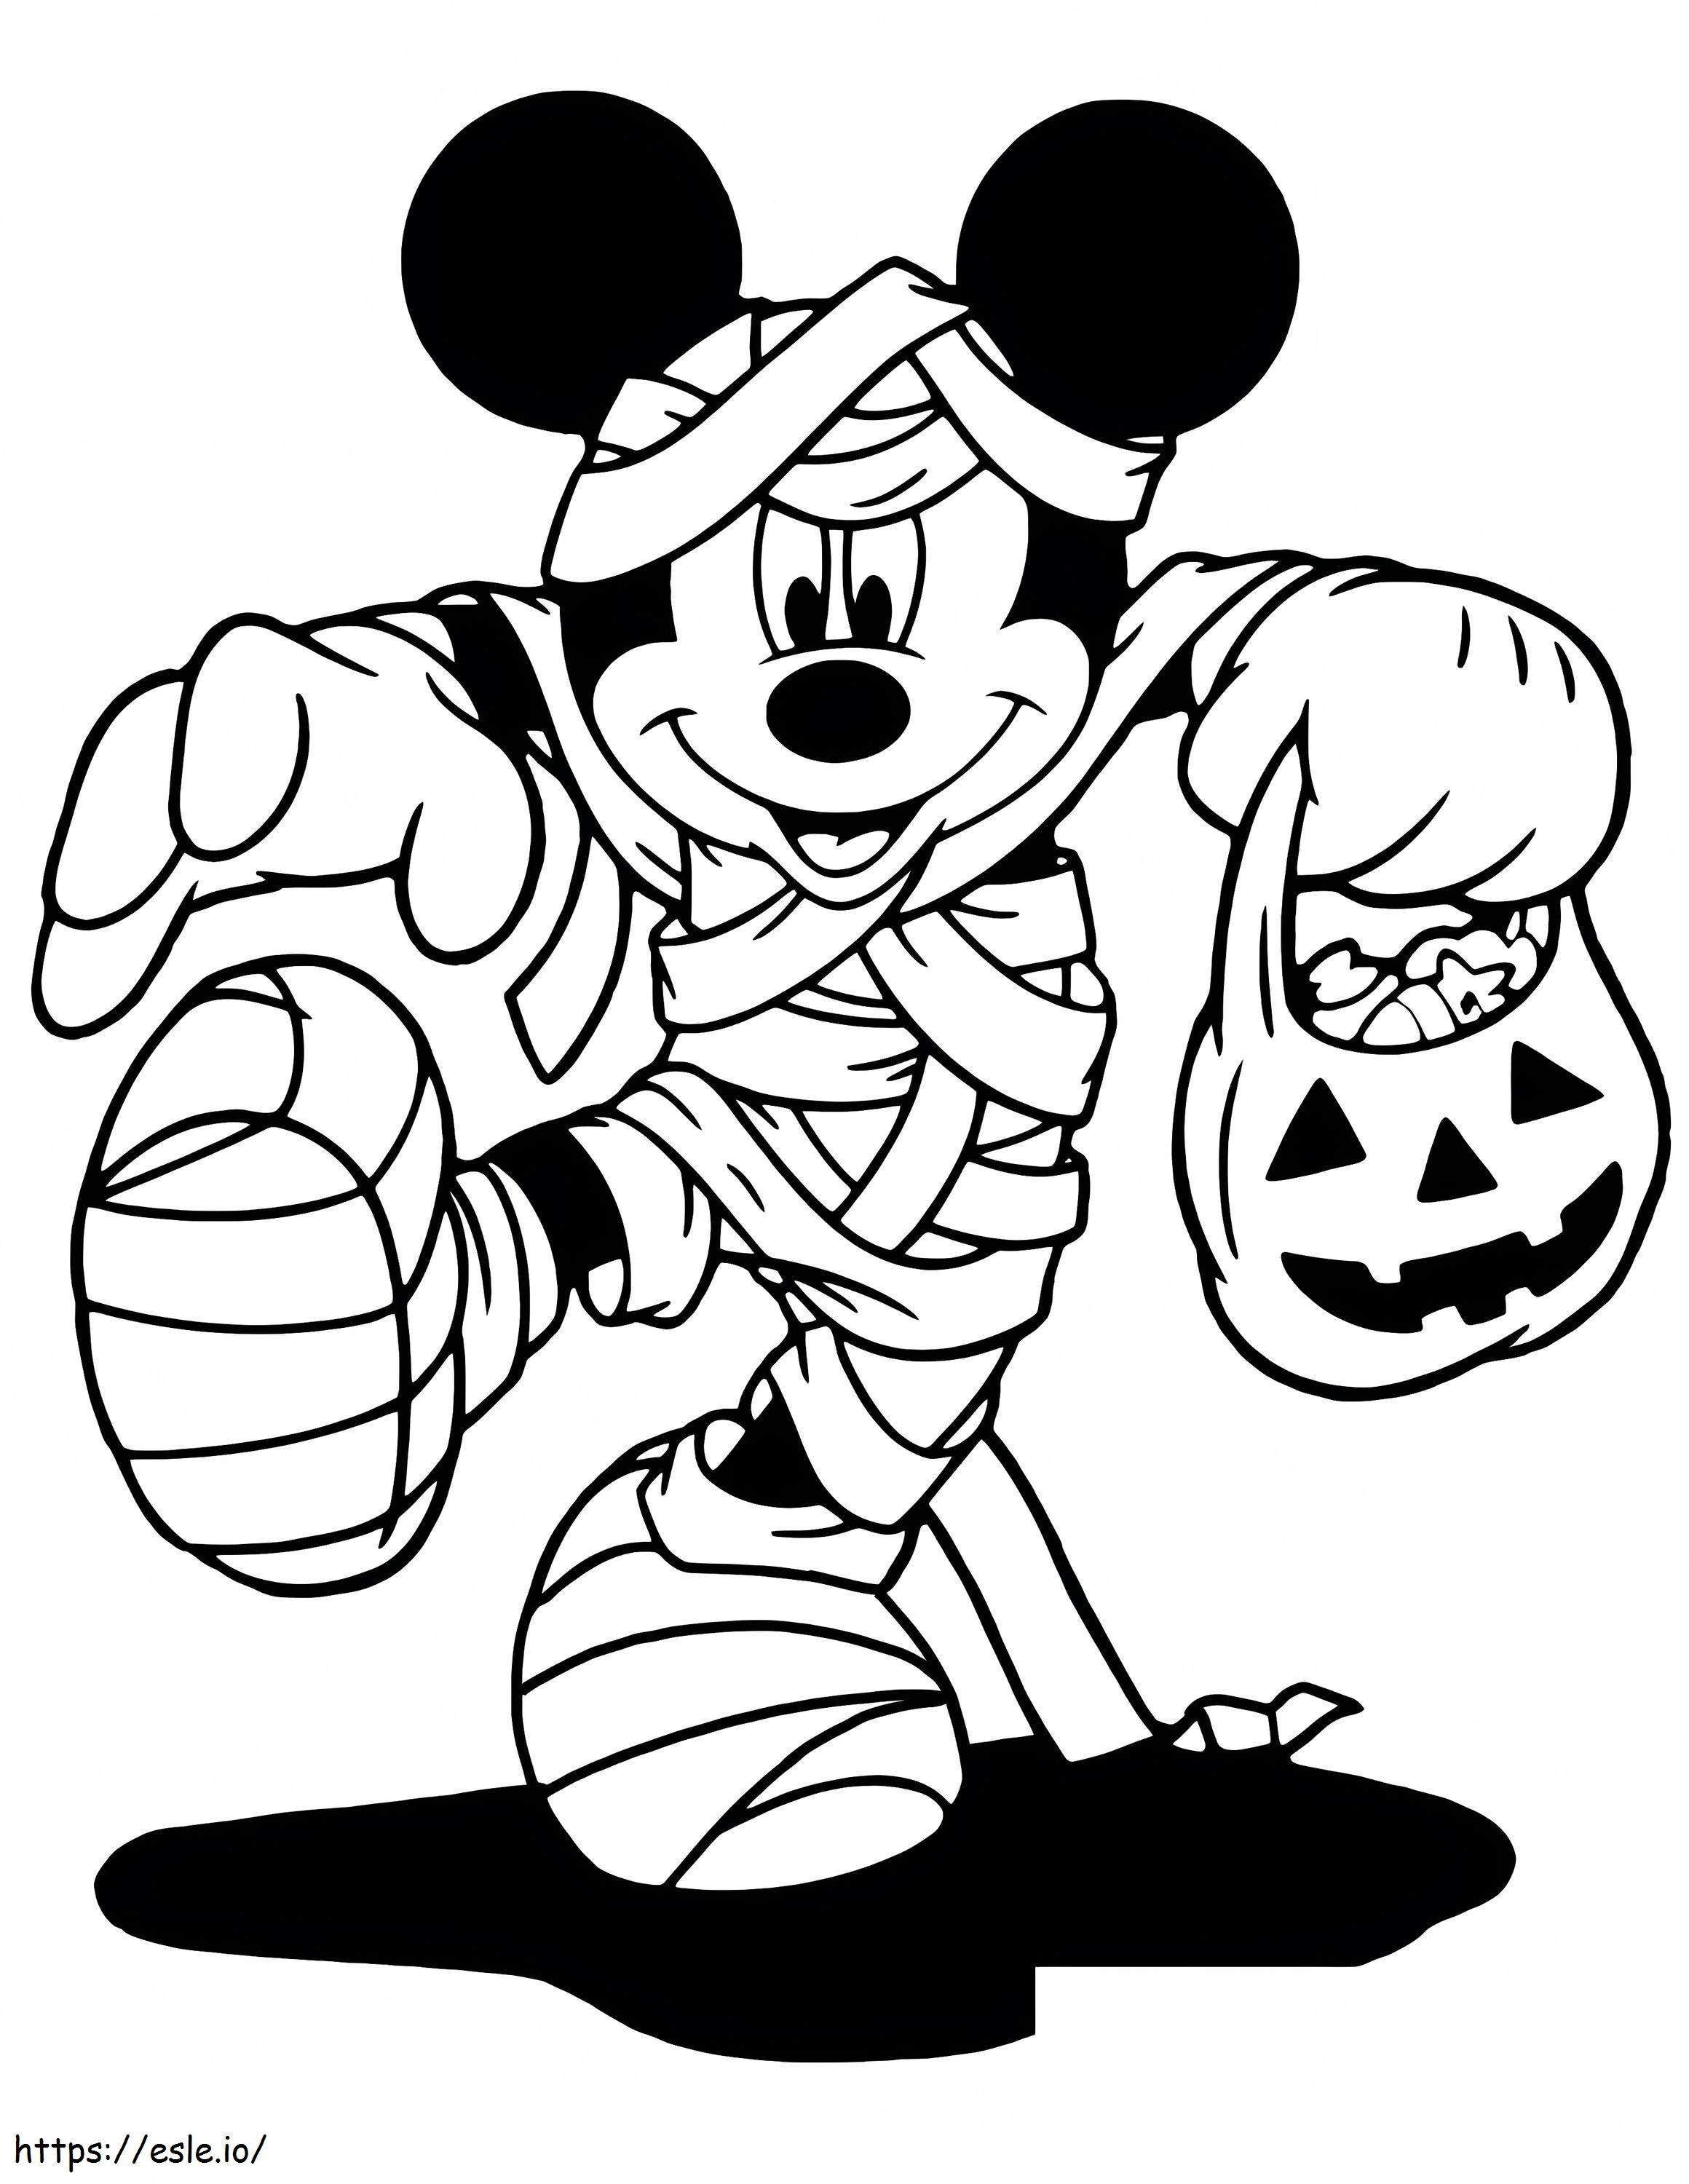 Mummy Mickey On Halloween coloring page